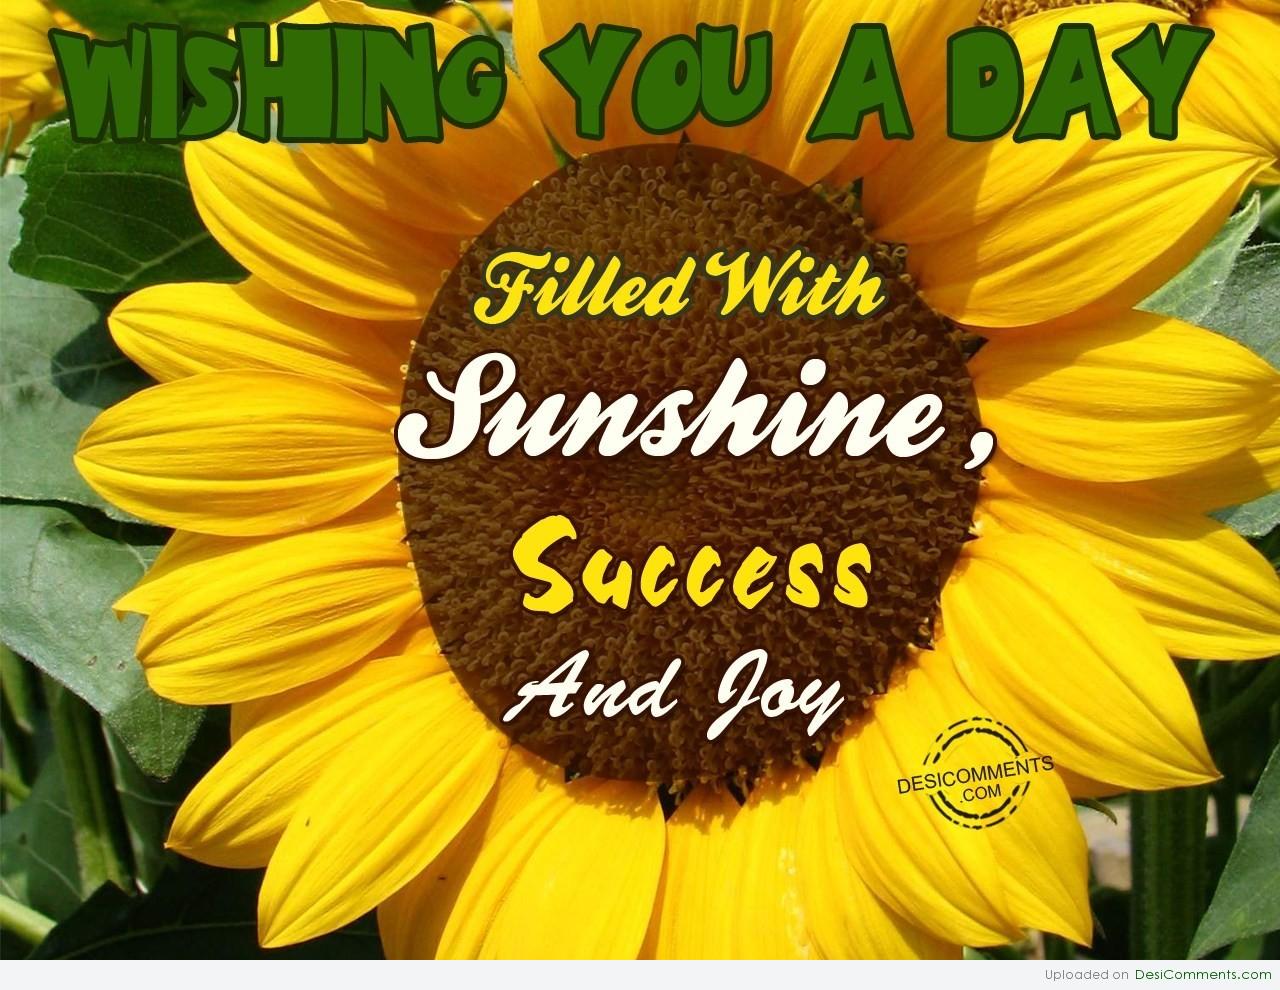 Wishing You A Day Filled With Sunshine - Desi Comments